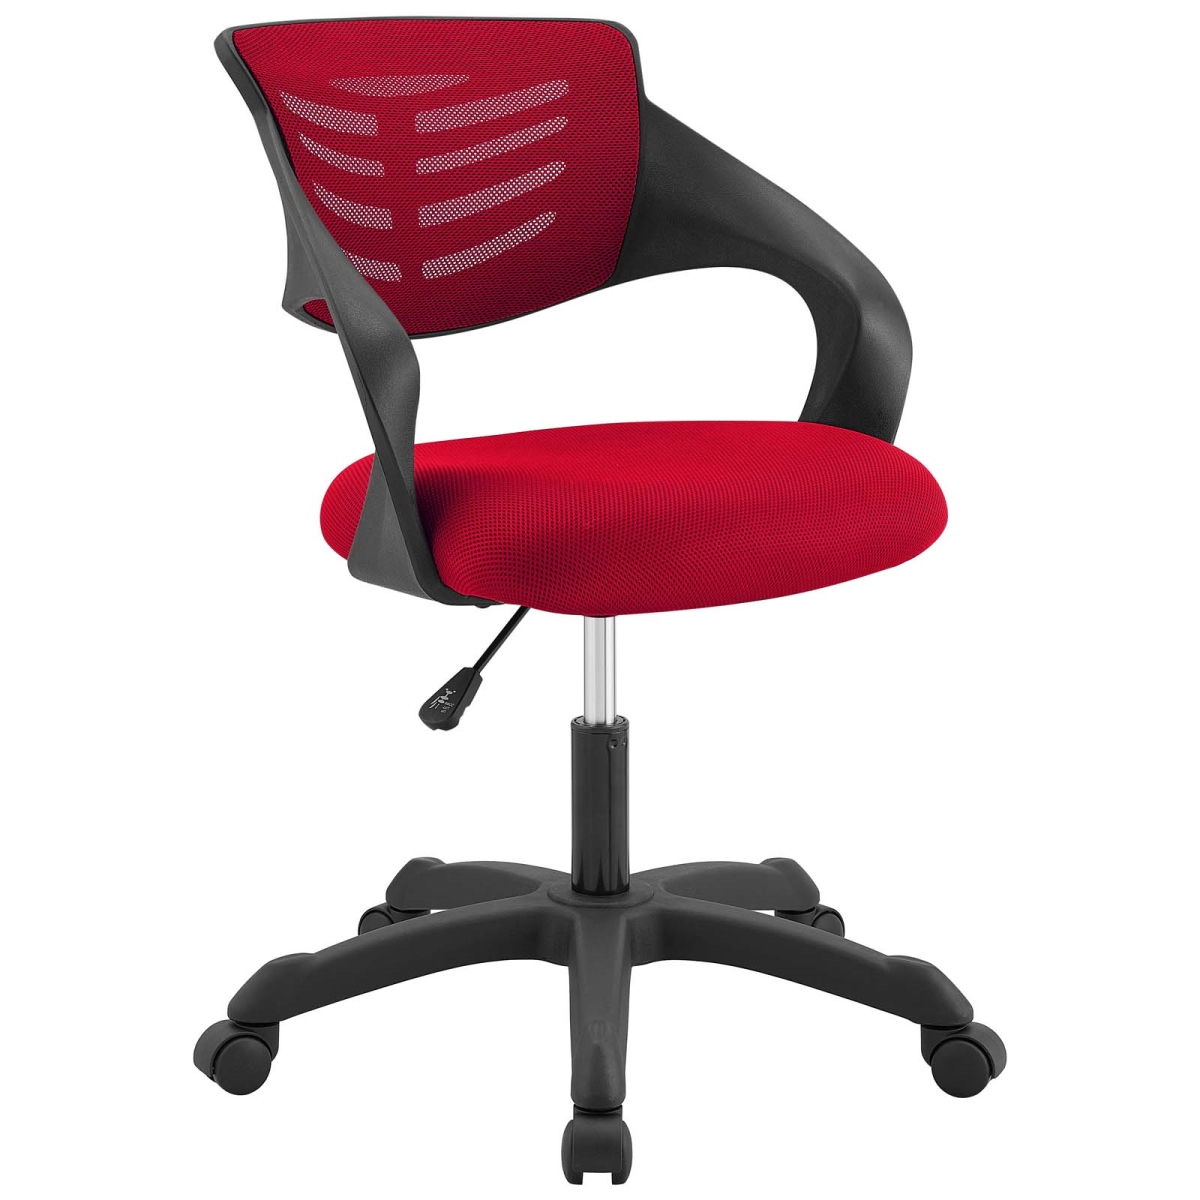 Eei-3041-red Thrive Mesh Office Chair - Red, 31.5 - 36 X 24.5 X 25 In.